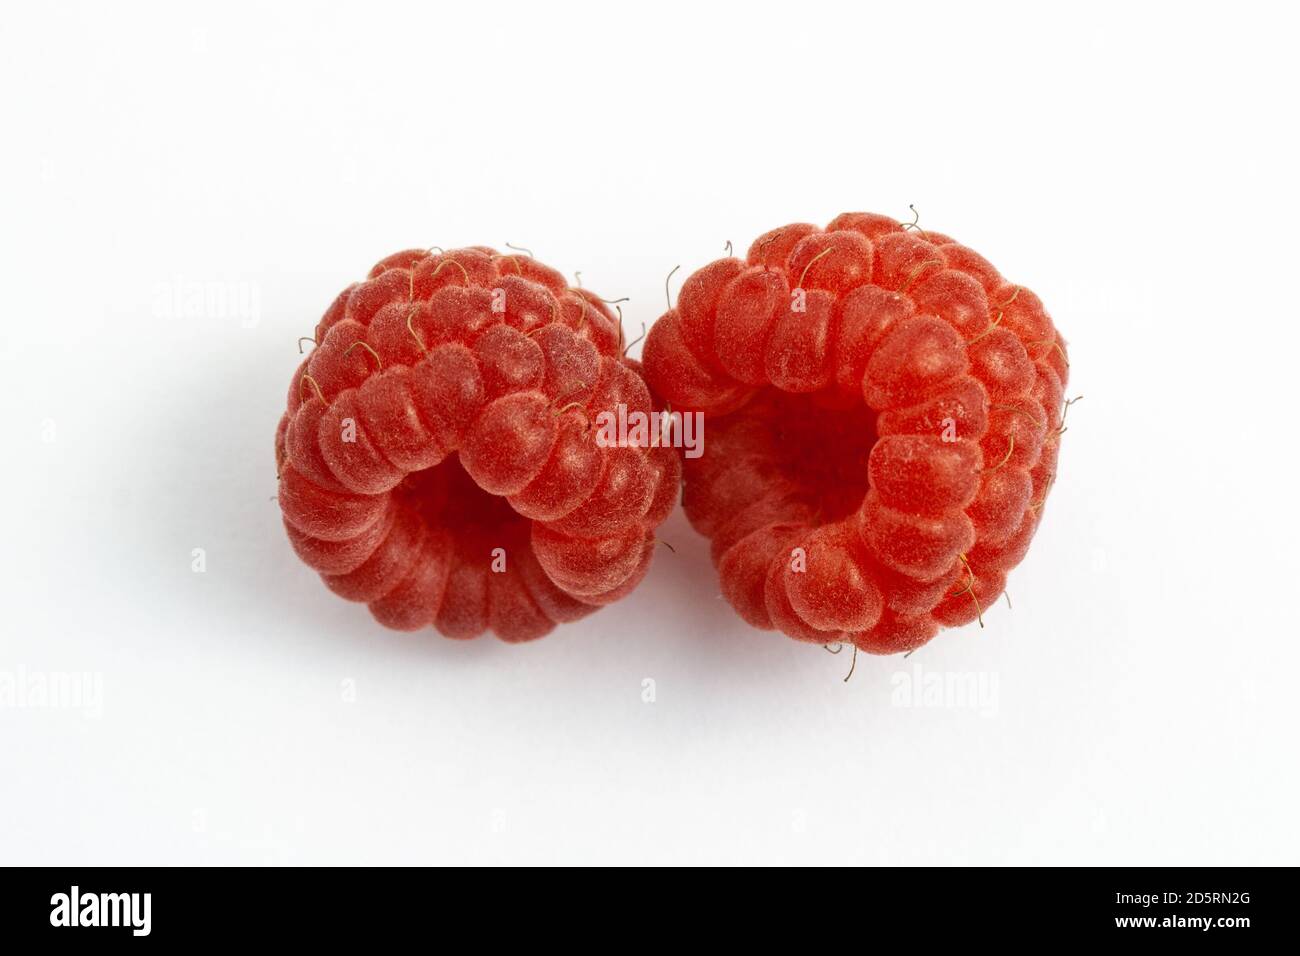 Two ripe raspberries isolated on a white background close-up. Fresh raspberries without sheets on the table. Macro shooting. Healthy, wholesome food. Stock Photo